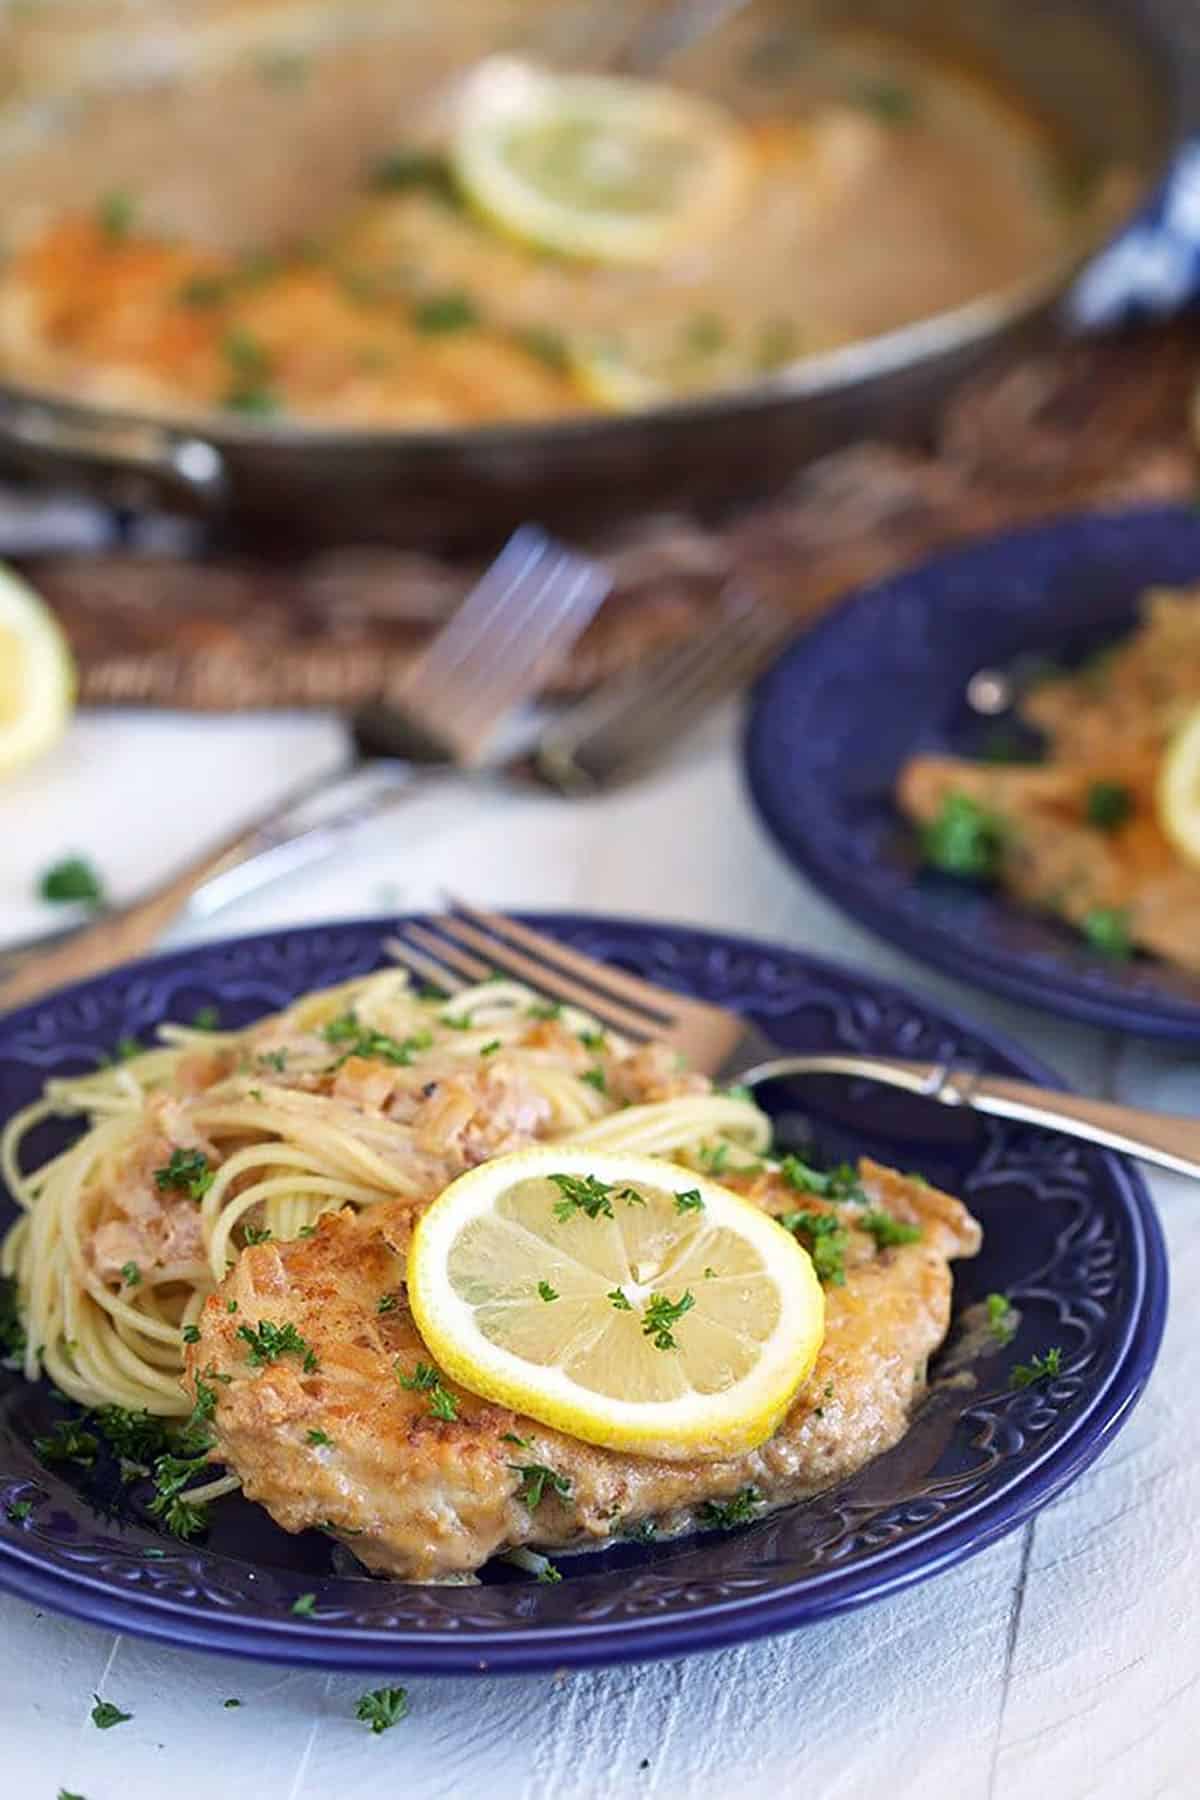 Lemon chicken scallopini on a blue plate with a skillet in the background.